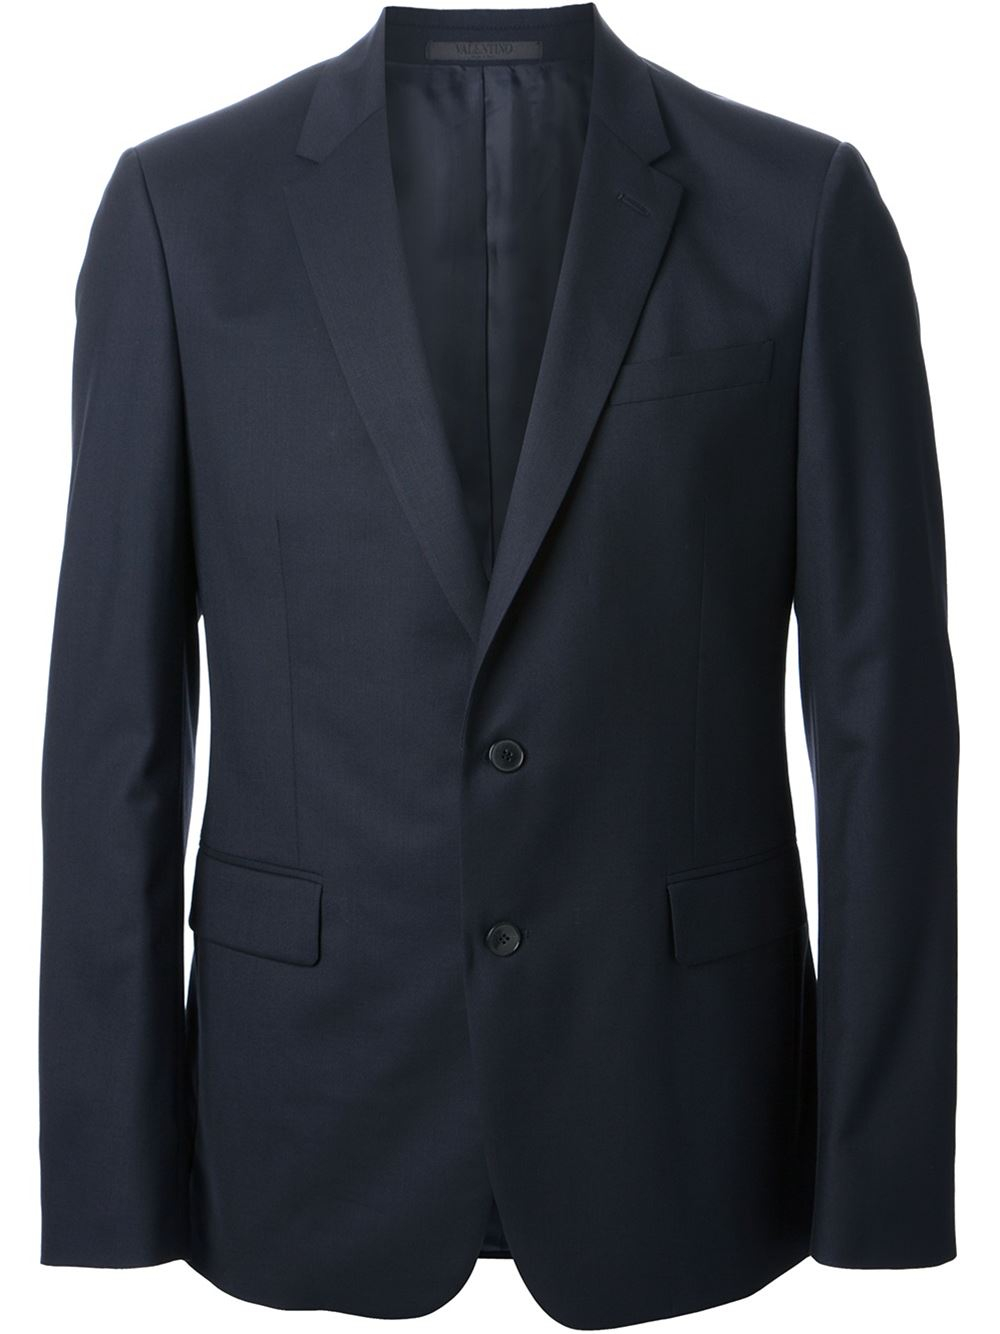 Lyst - Valentino Formal Two Piece Suit in Gray for Men